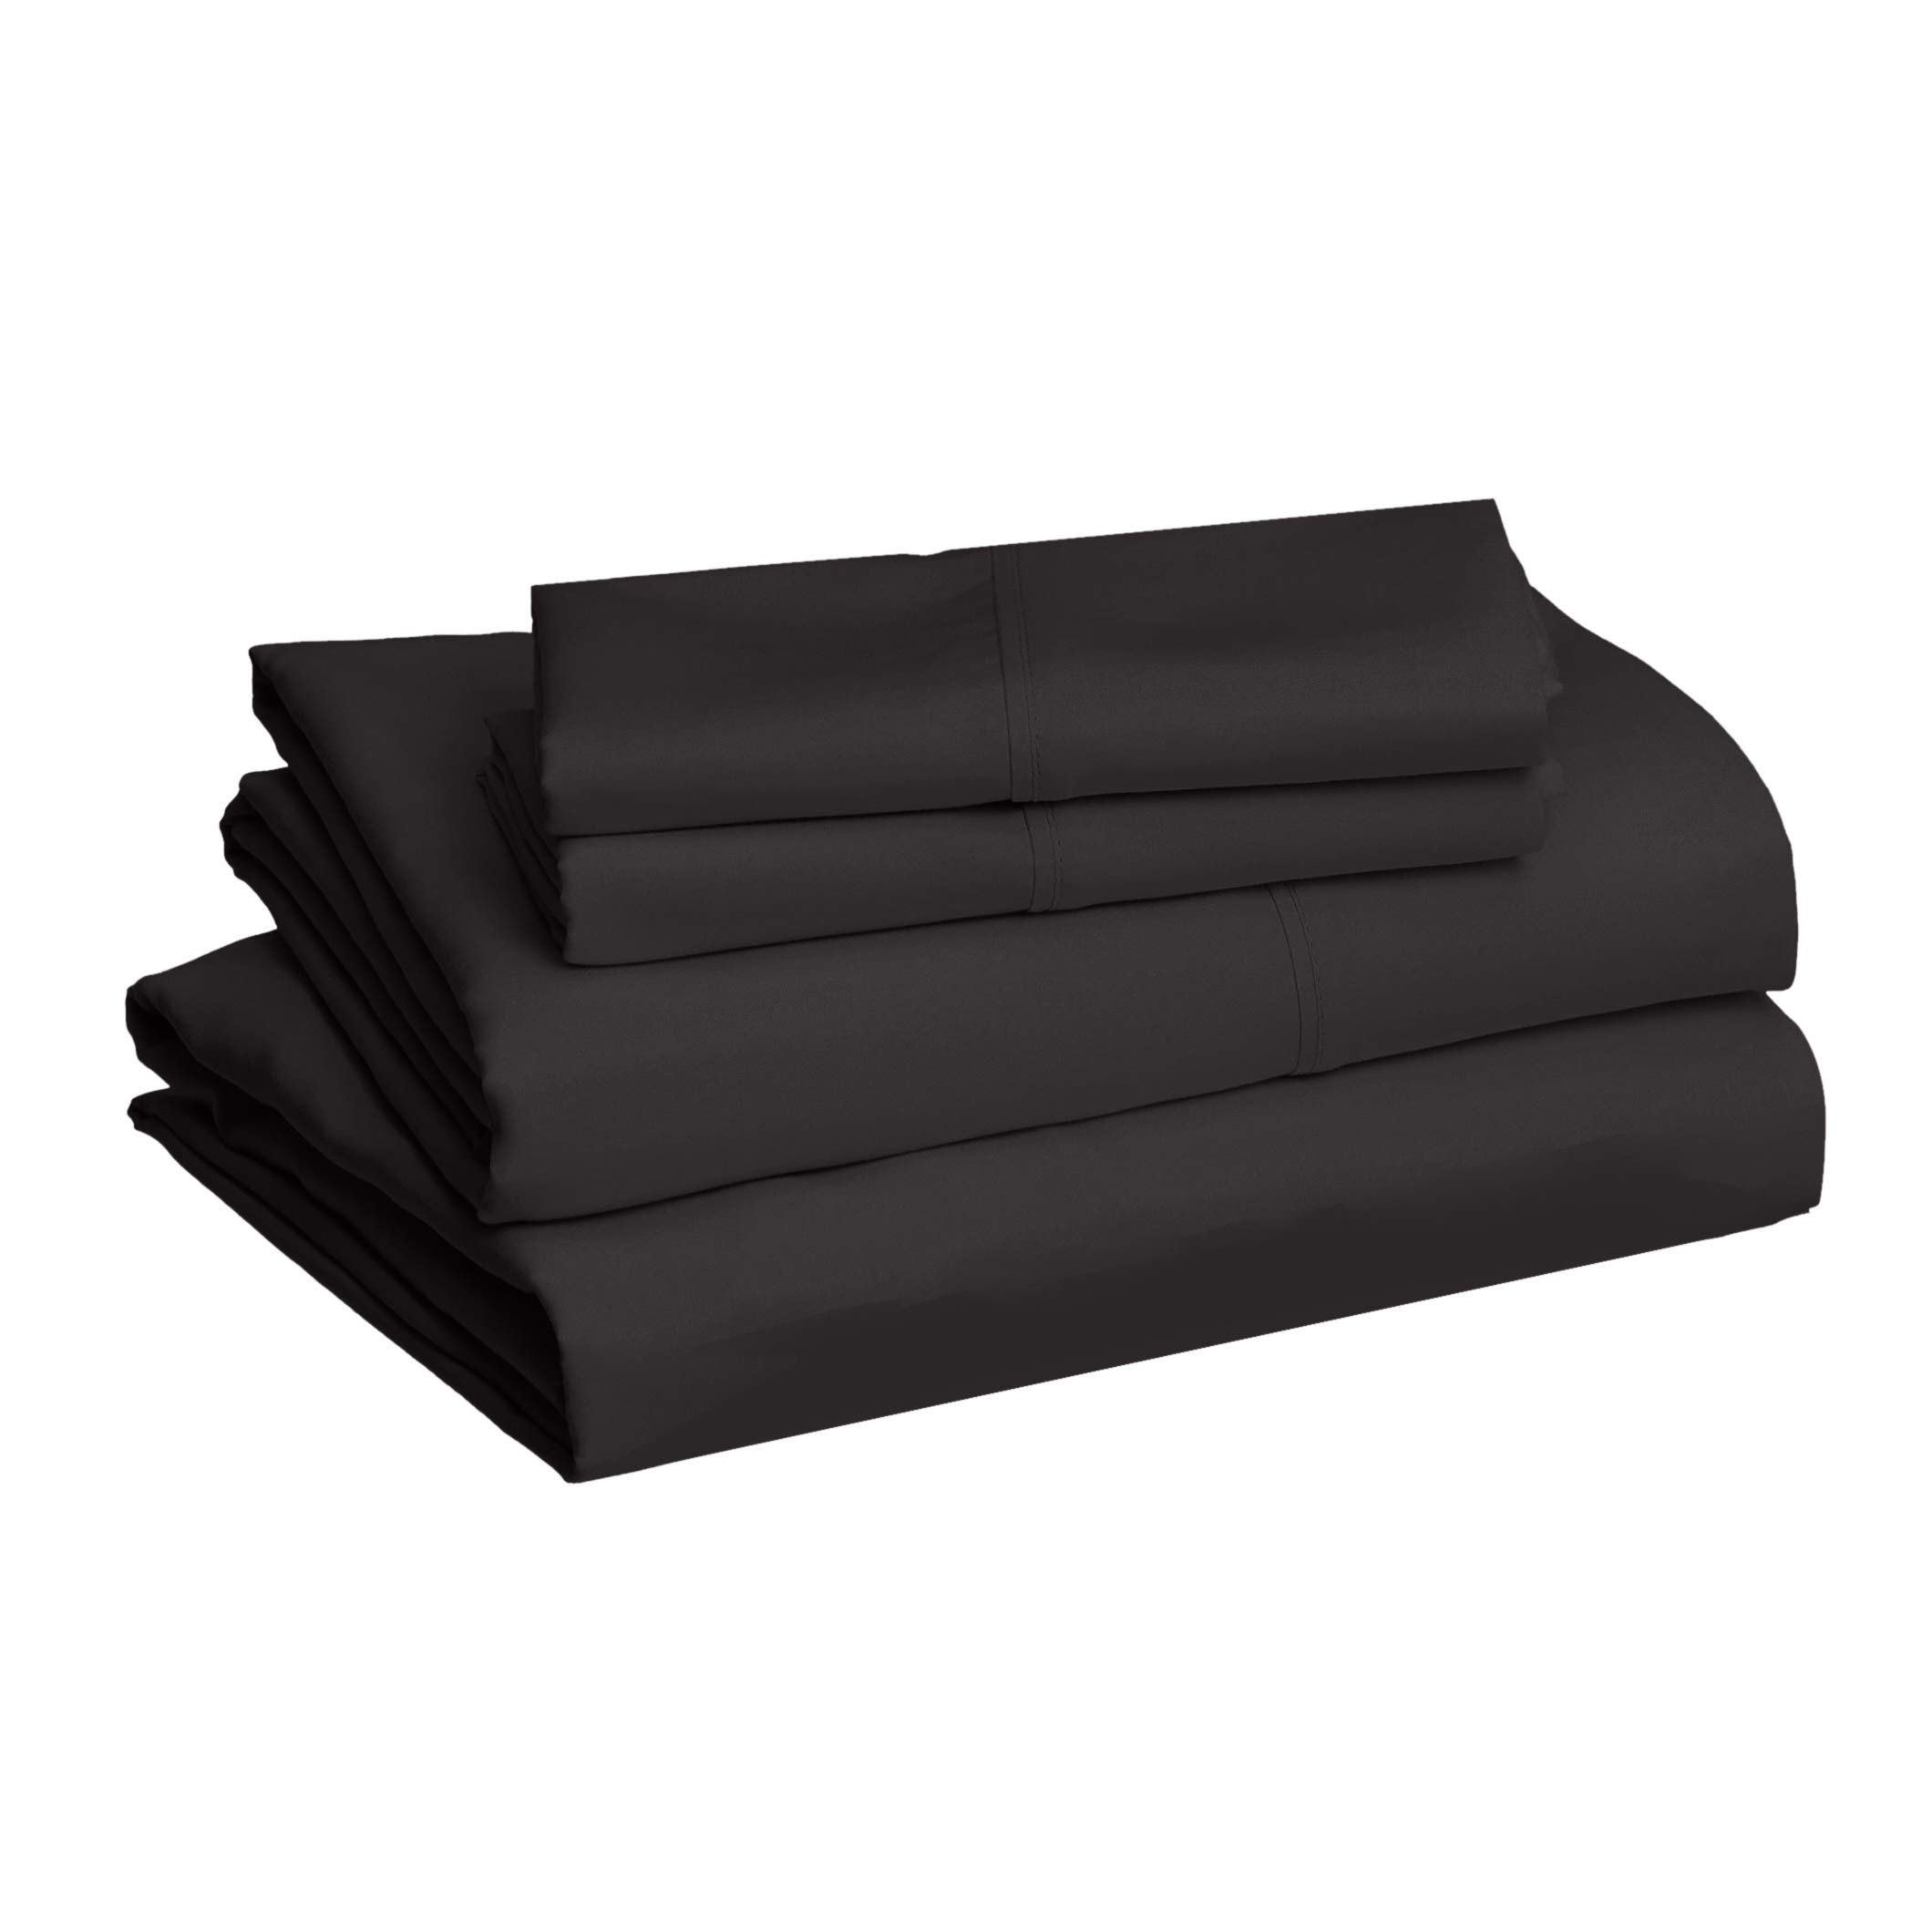 Book Cover Amazon Basics Lightweight Super Soft Easy Care Microfiber 4 Piece Bed Sheet Set With 14-Inch Deep Pockets, King, Black, Solid King Sheet Set Black